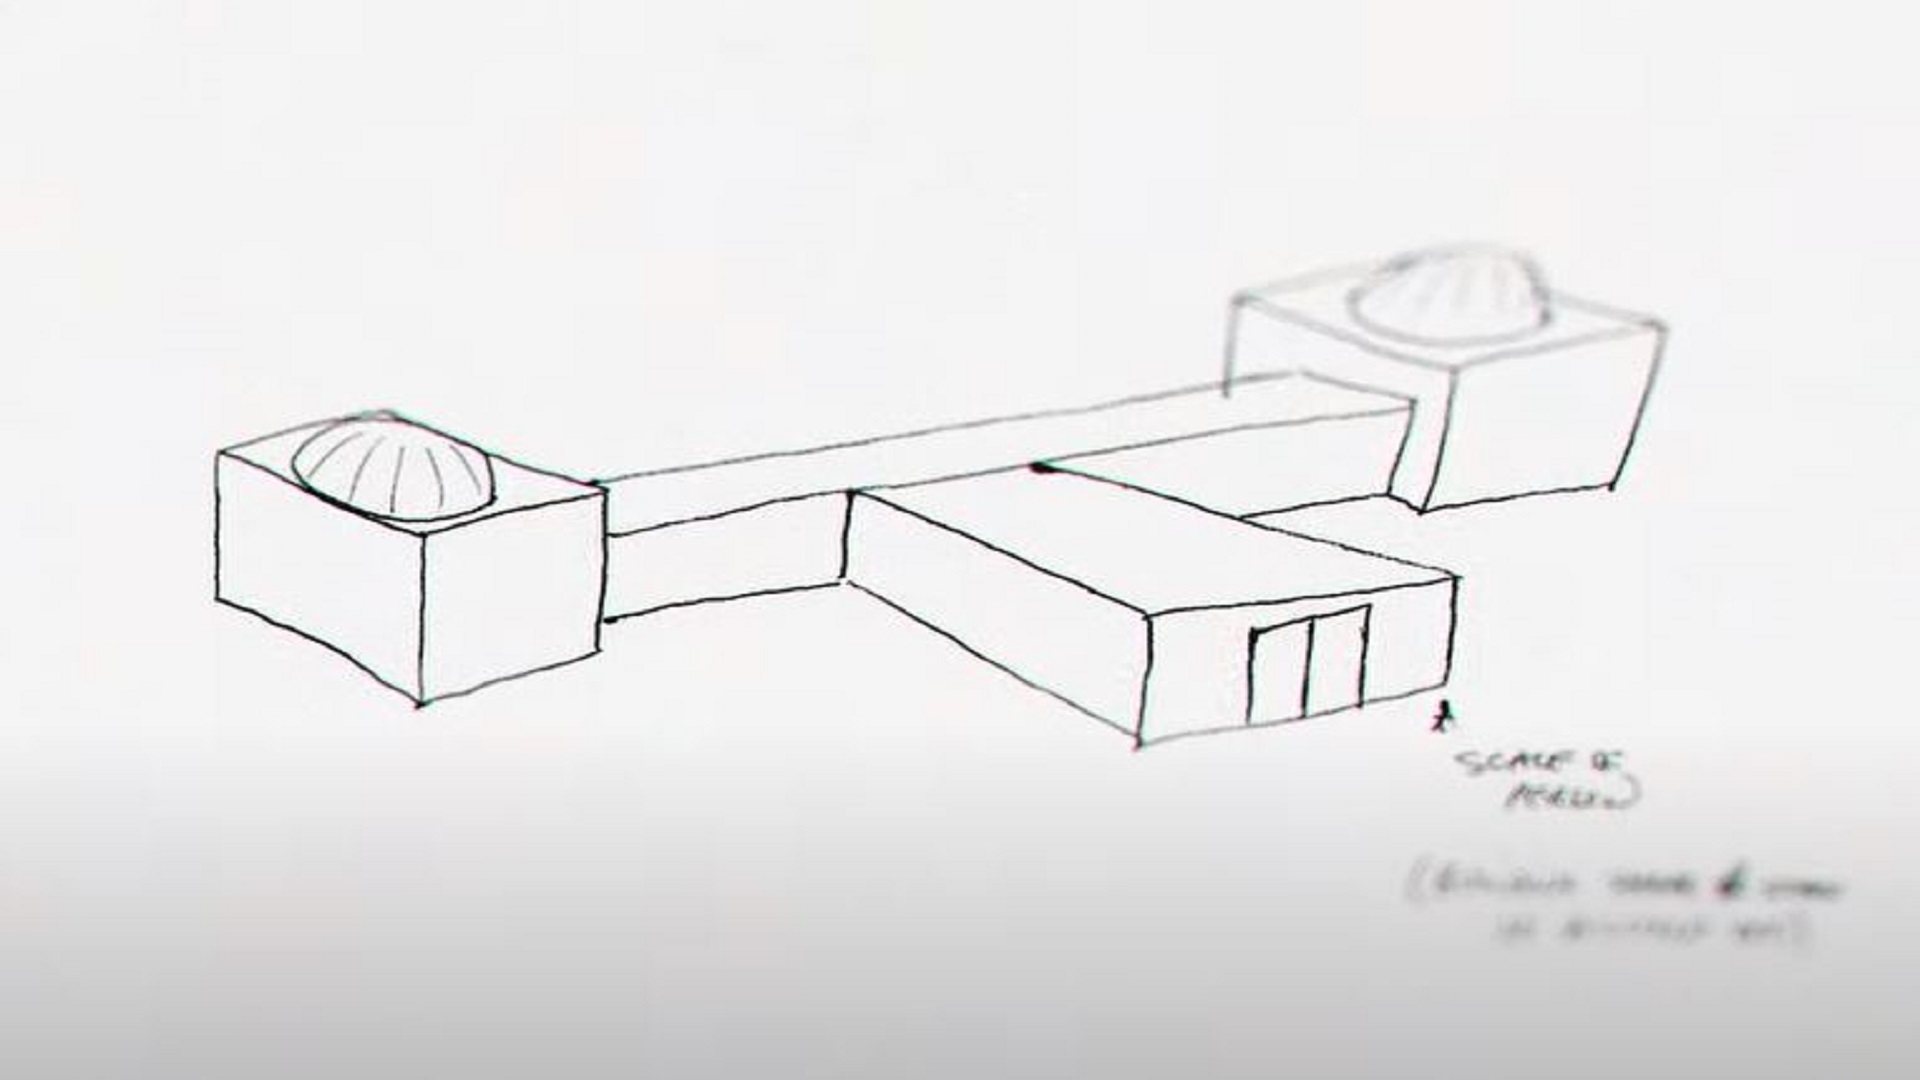 Sketch of the T-Shaped building the witness saw